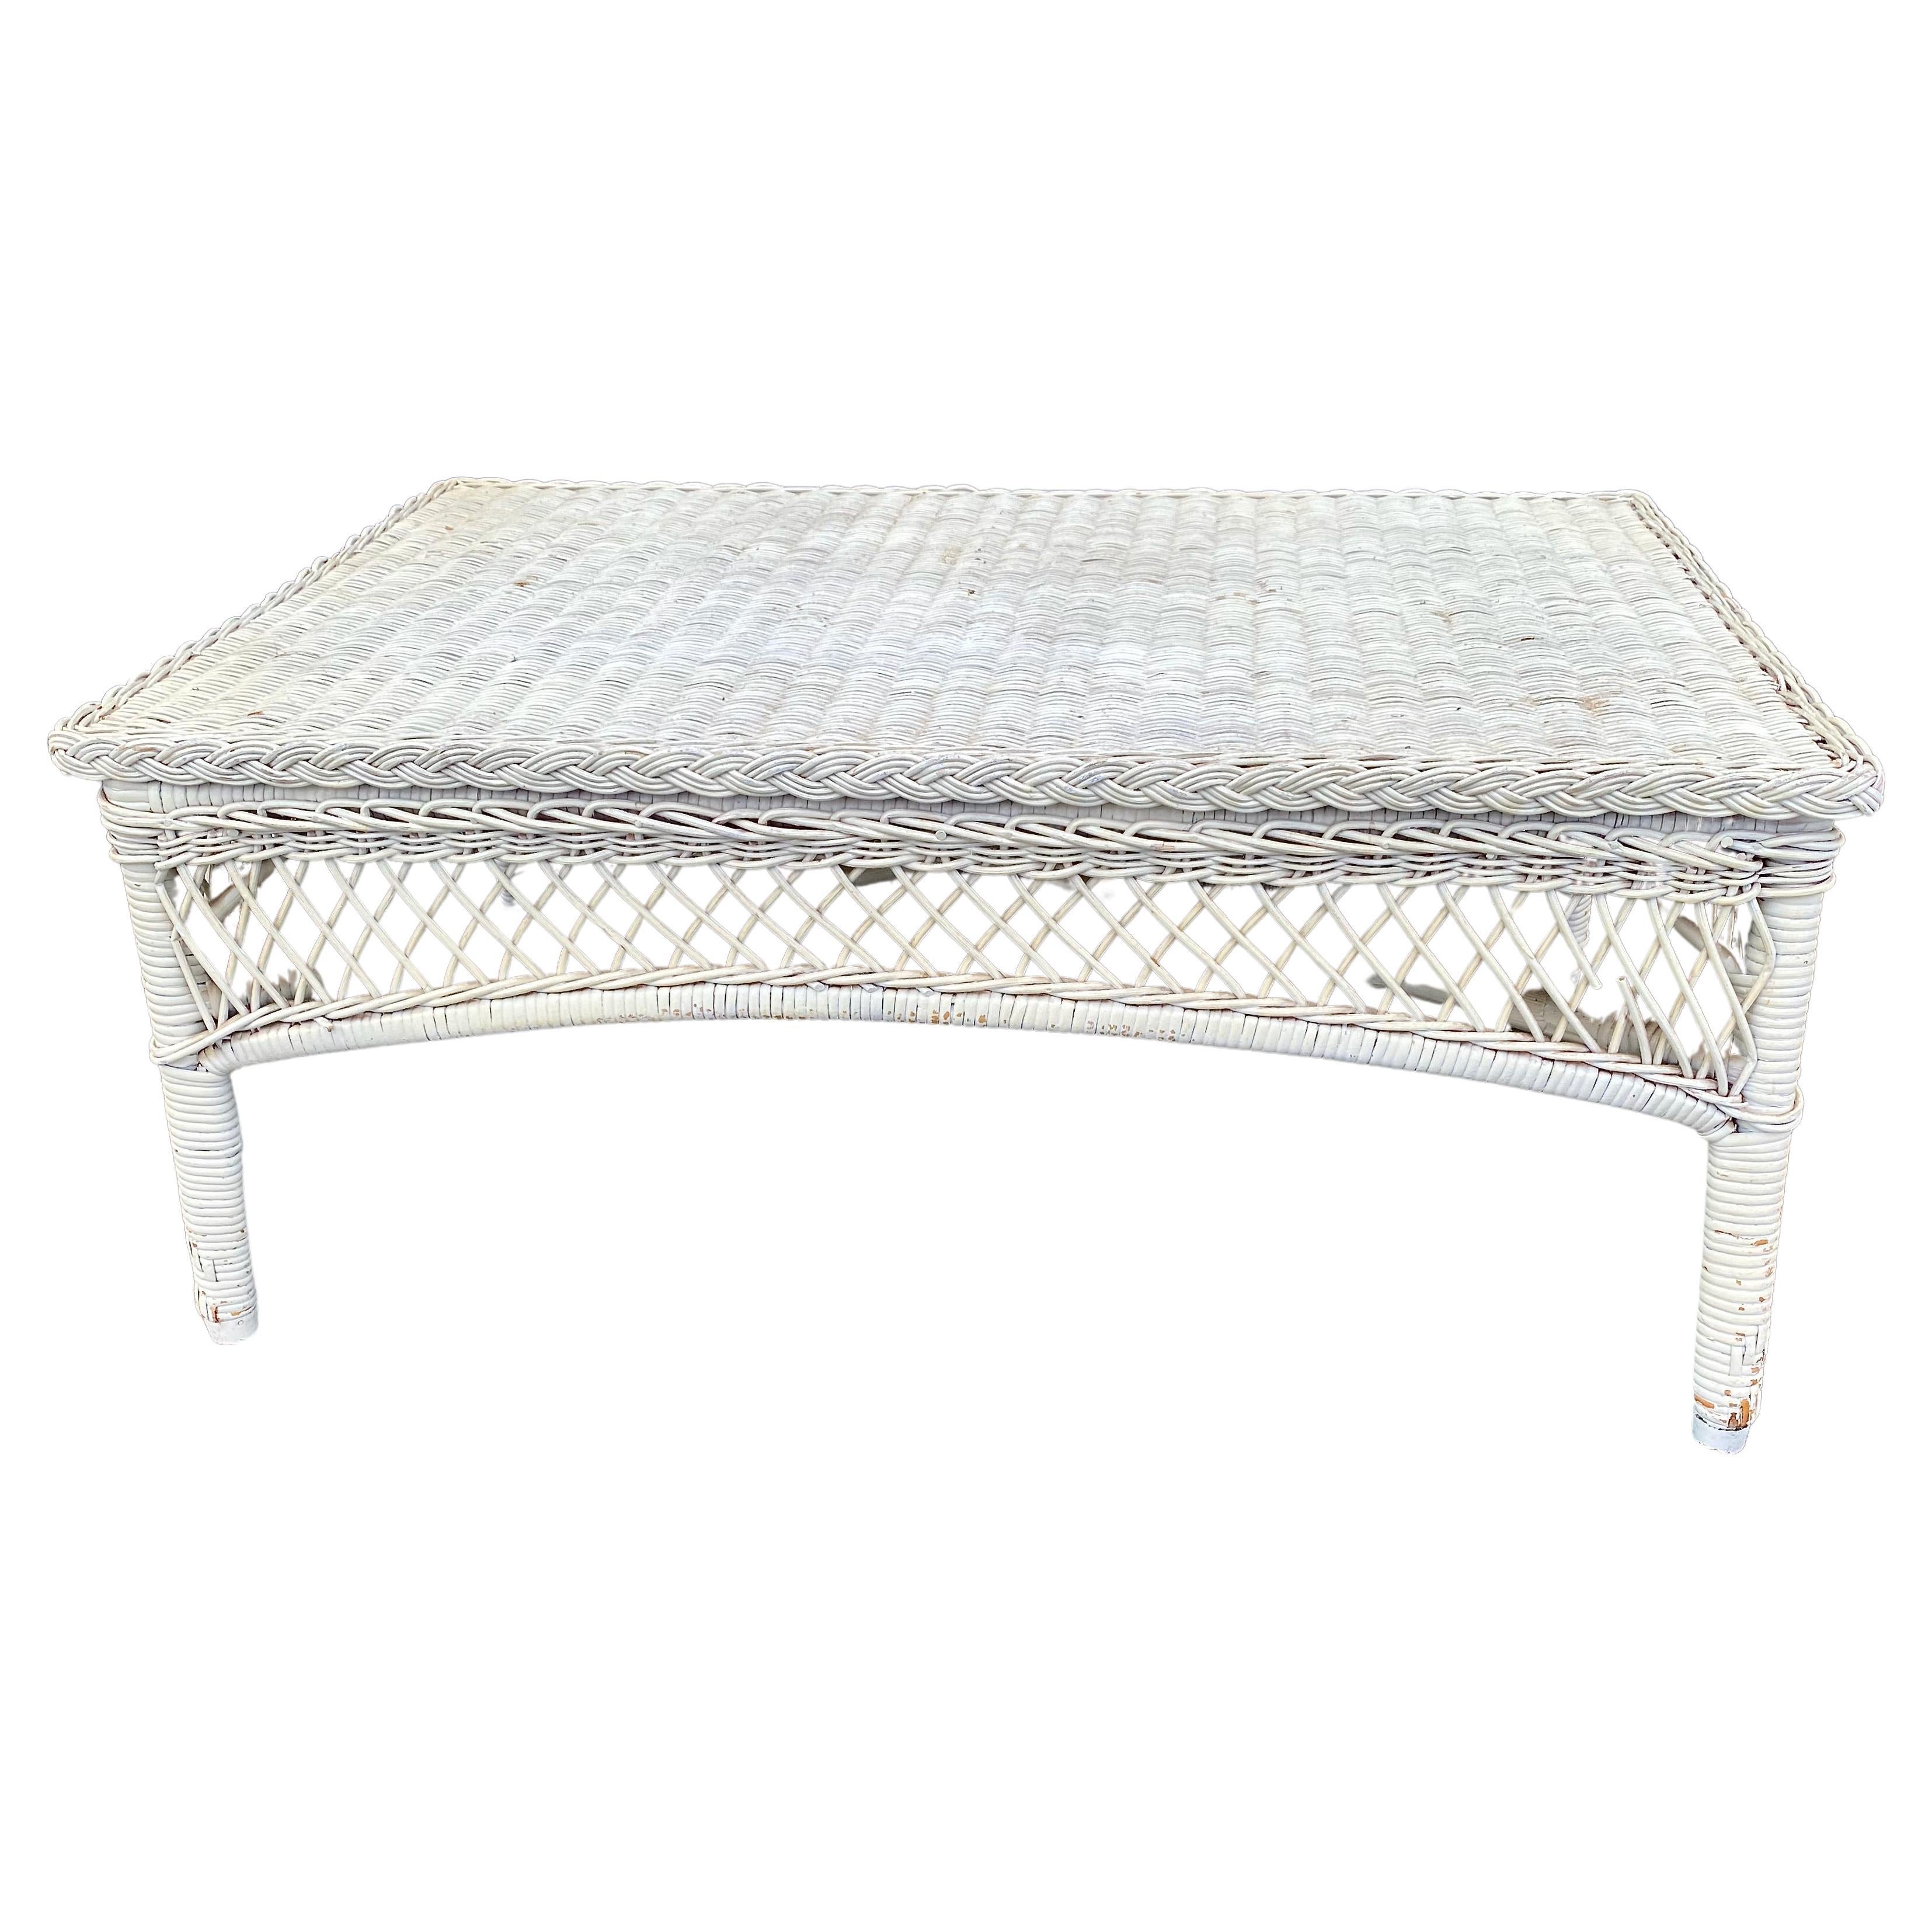 This is a charming all wicker coffee table that dates to circa 1930 -1940. and is most probably a Bar Harbor piece. The table features a woven rolled edge construction and a lower wicker shelf. The table is in very good original condition with minor